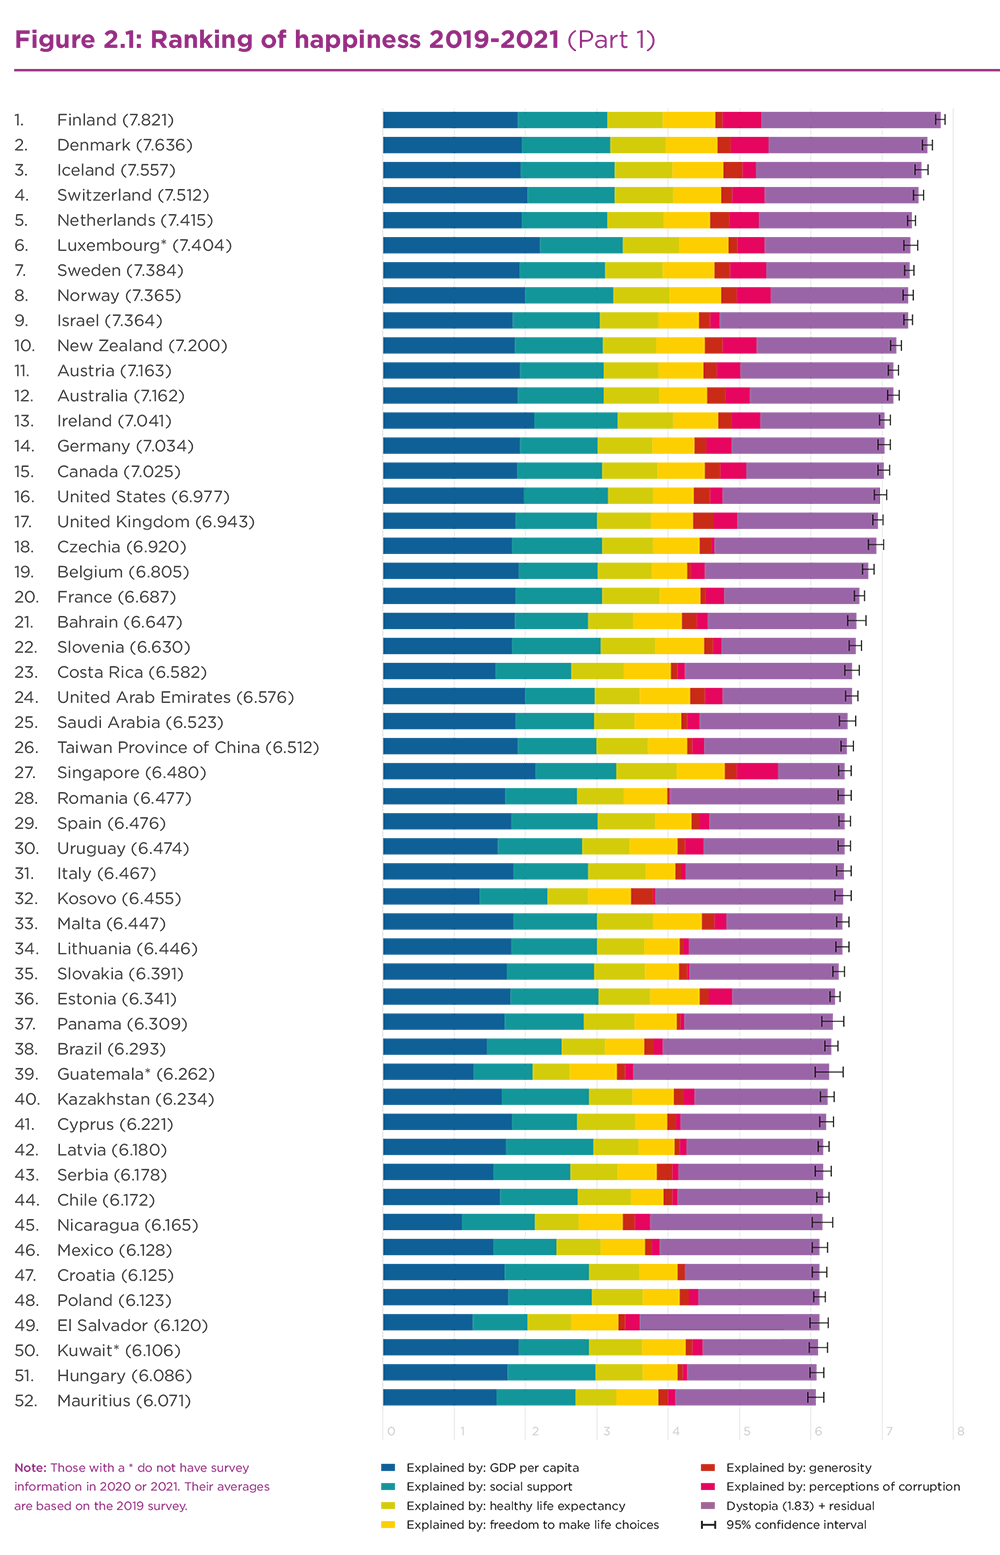 World happiness report. World Happiness Report 2021. World Happiness Report 2023. ООН World Happiness Report. Finland Happiest Country.